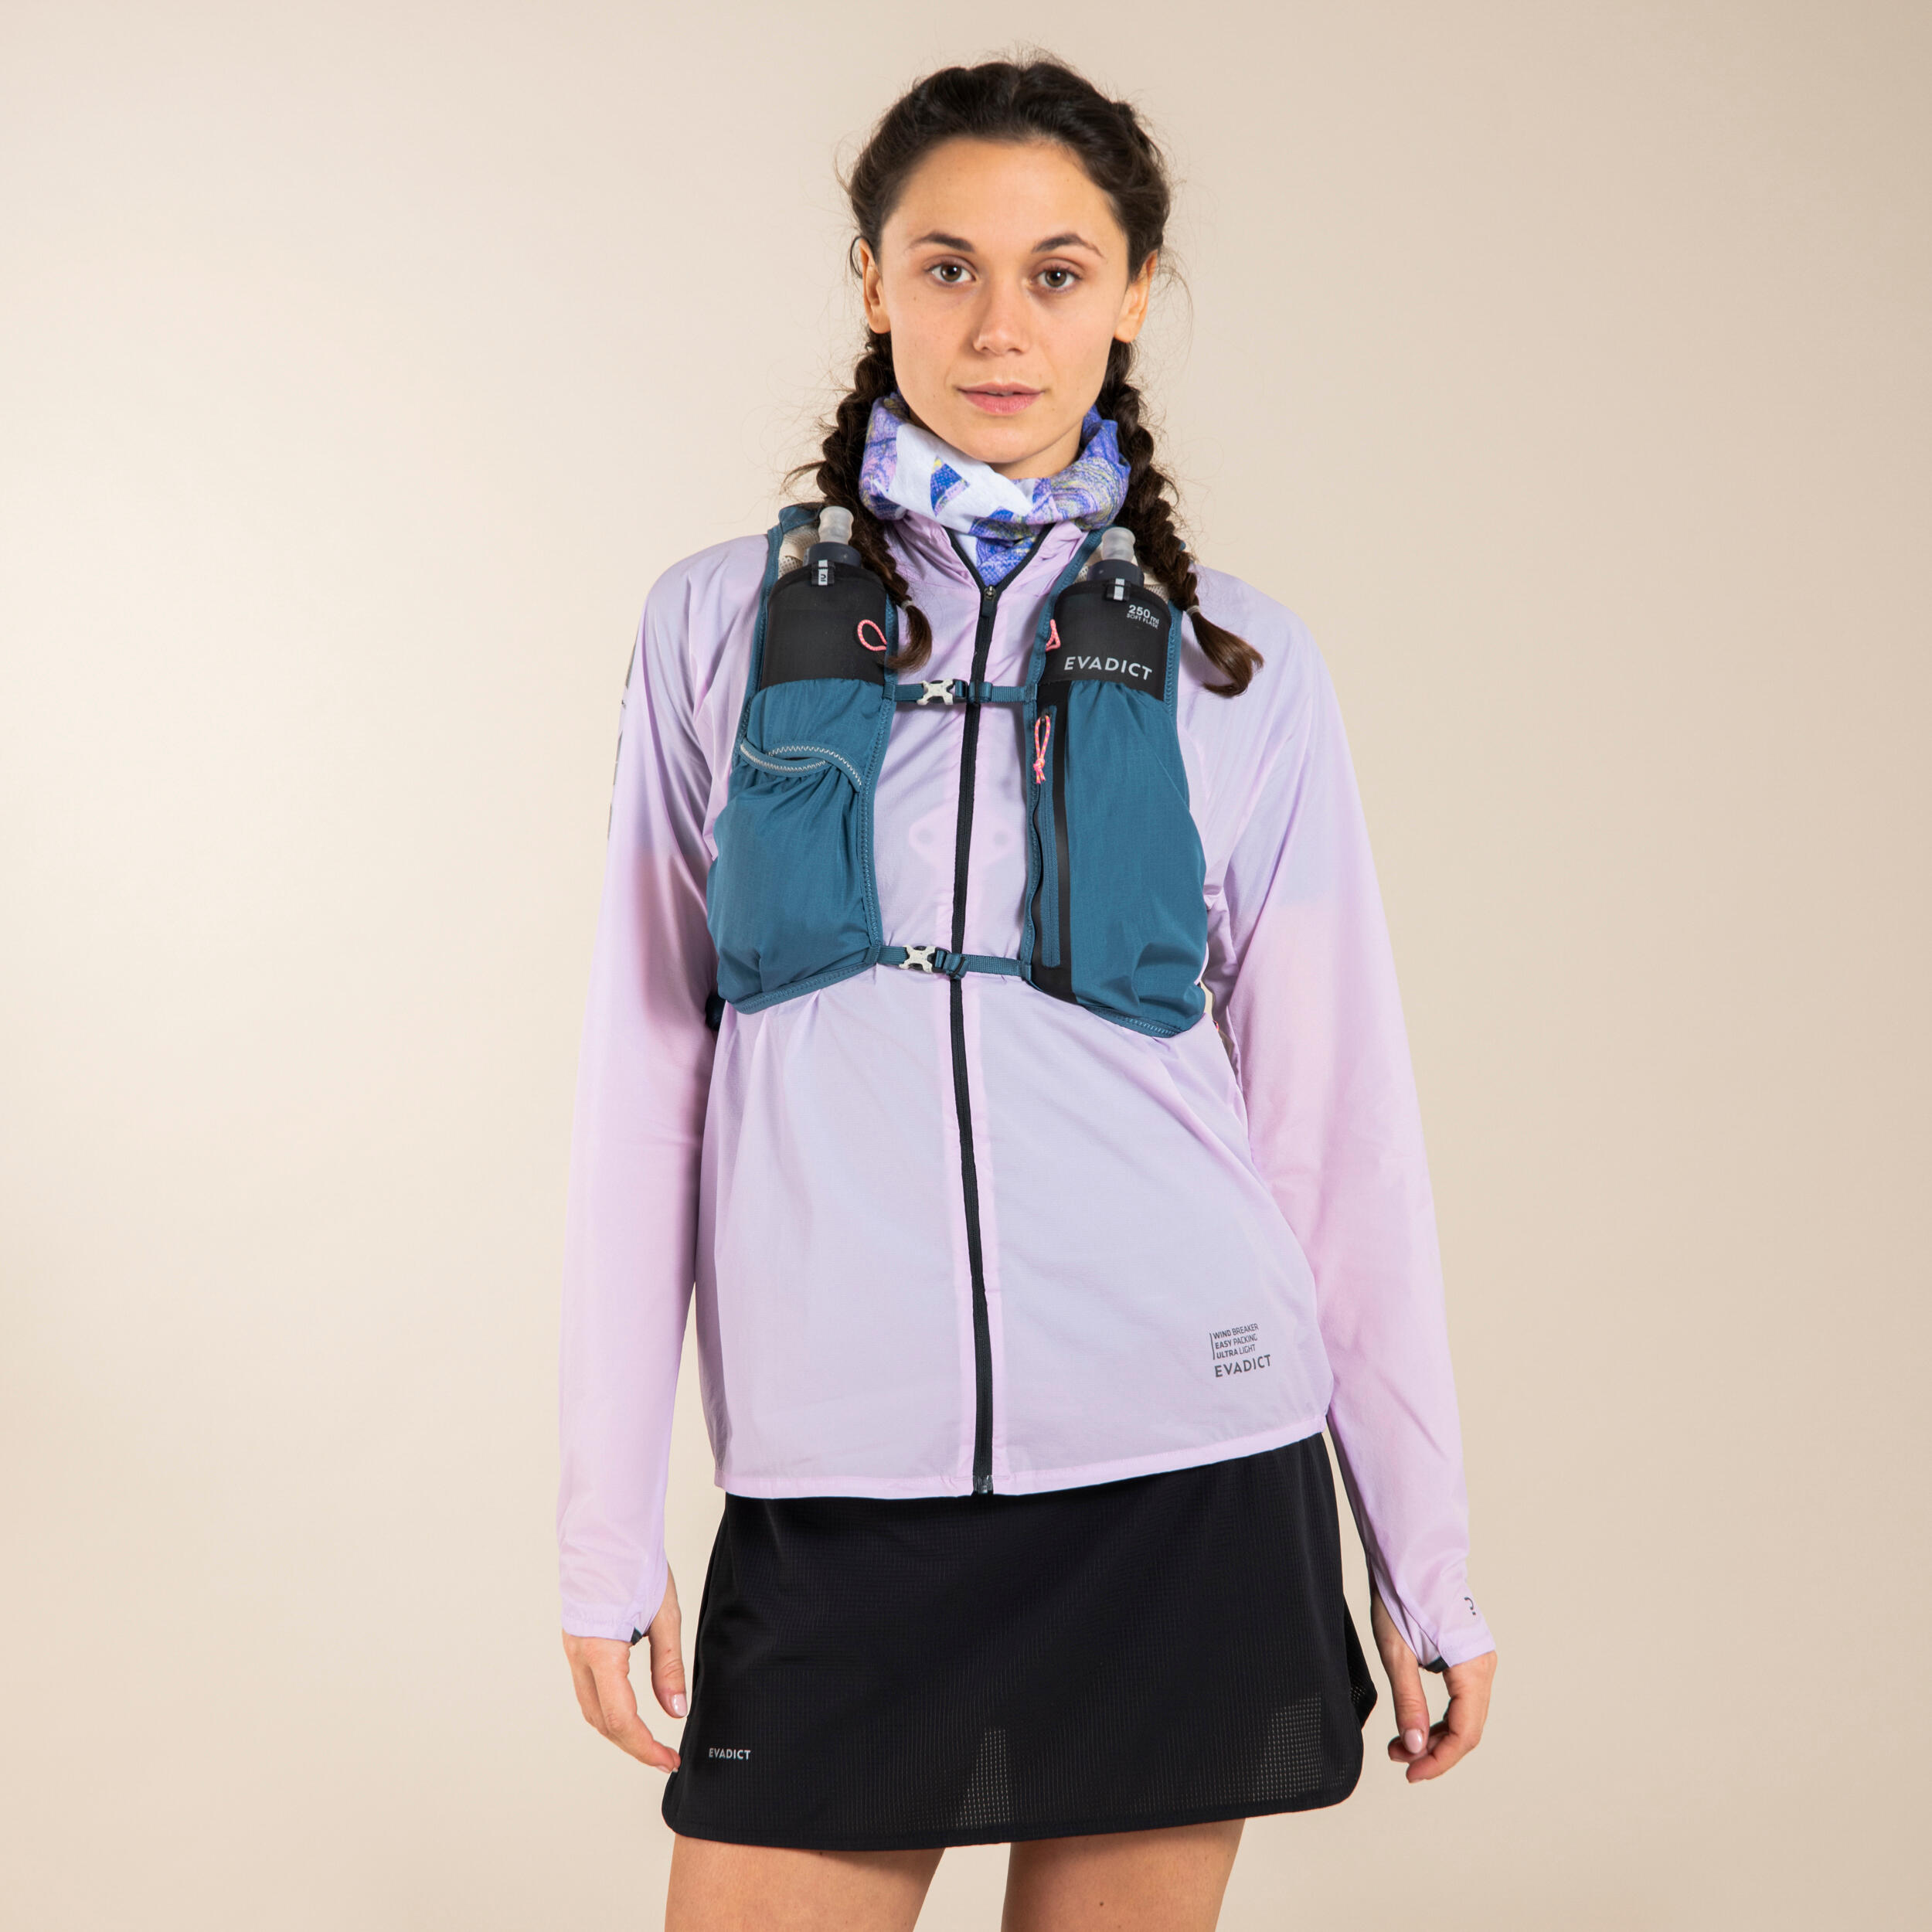 WOMEN'S TRAIL RUNNING LONG-SLEEVED WINDPROOF JACKET - LILAC 10/10